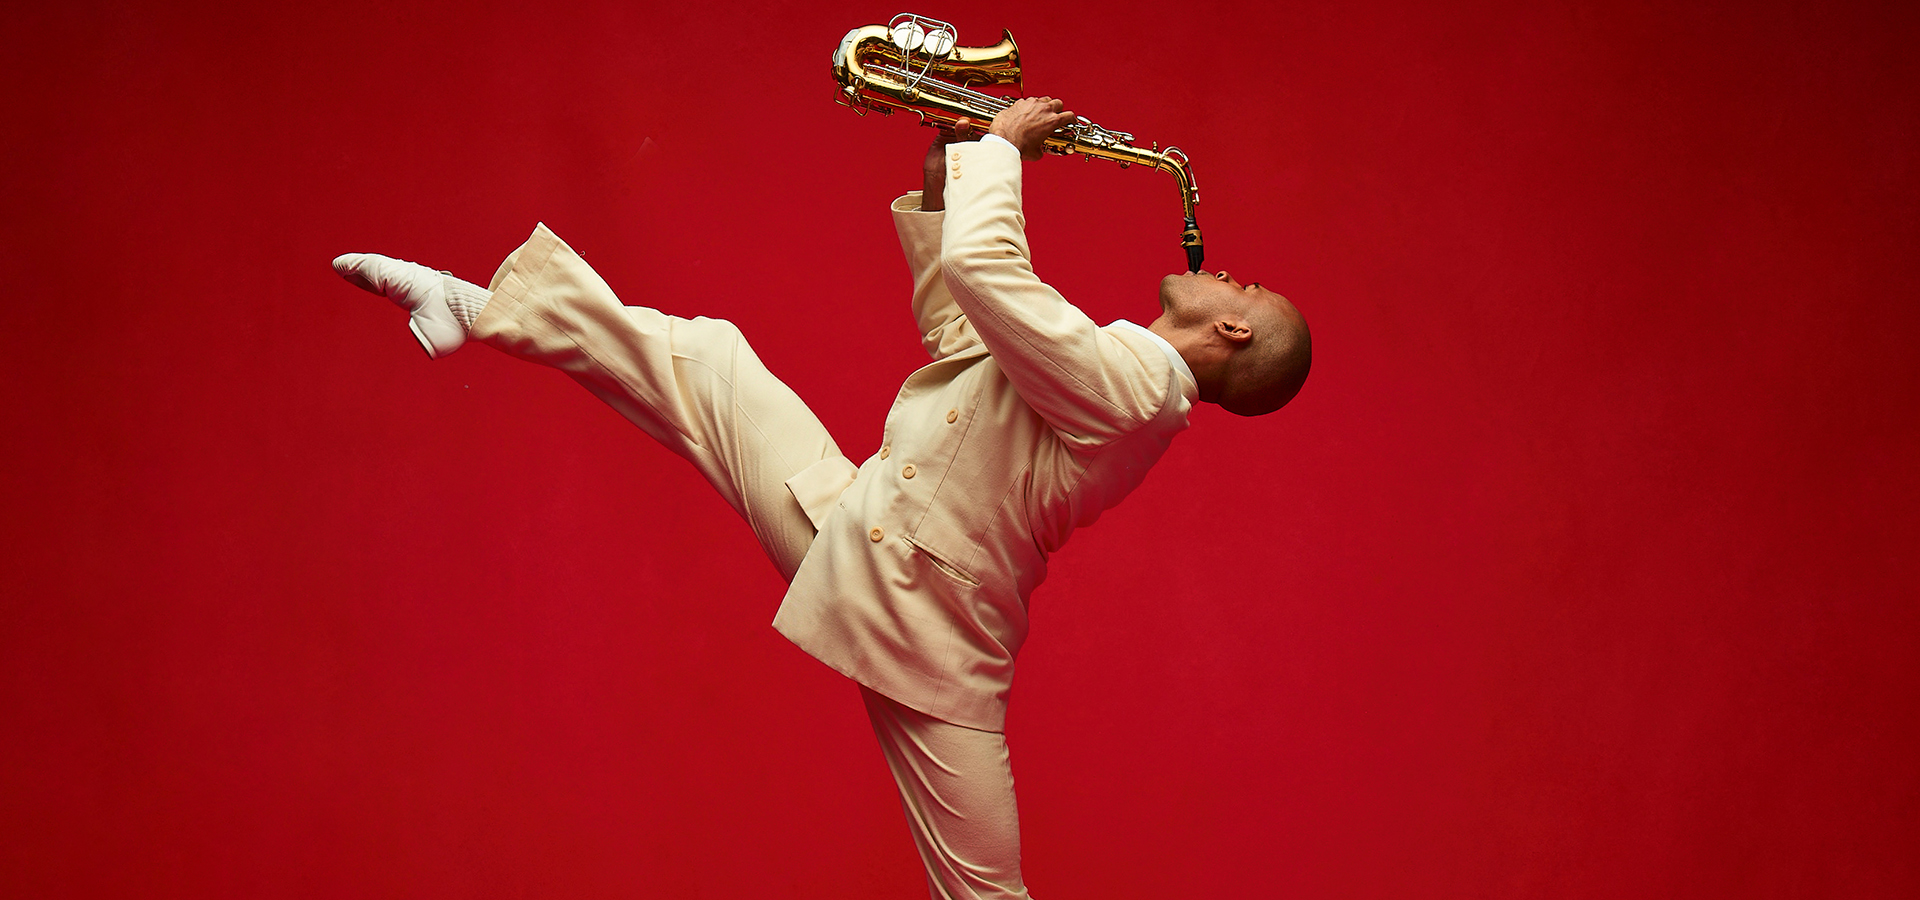 An Alvin Ailey American Dance performer in a cream costume, playing the saxophone with his leg lifted in an attitude.